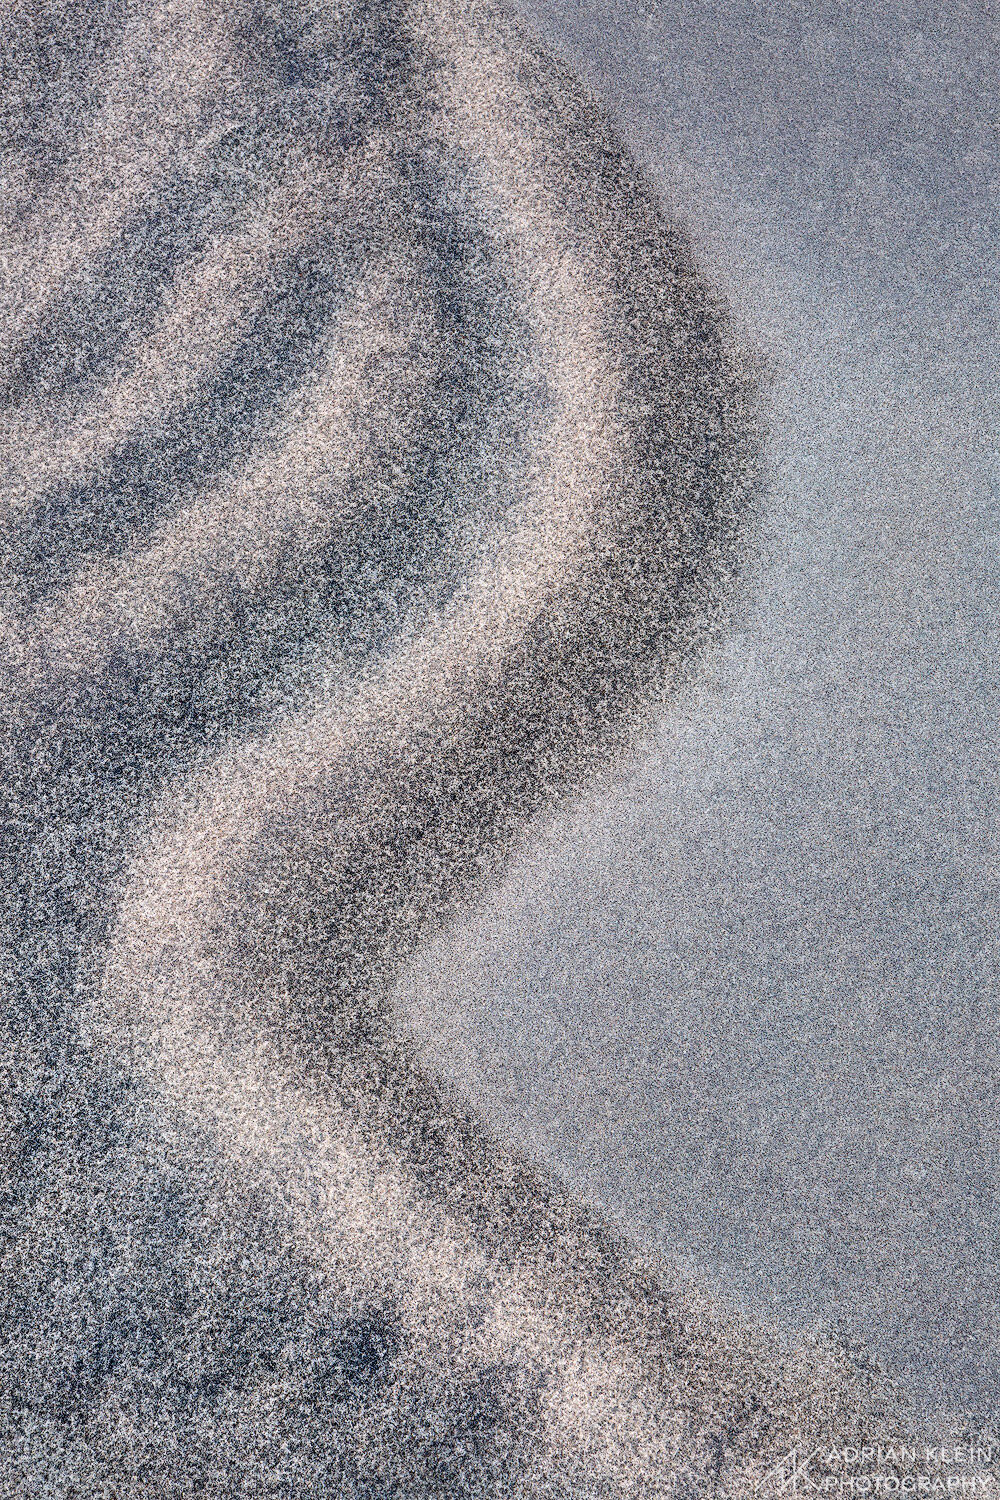 A close up scene of sand with the varying shades and lines. Along the Oregon Coast. Limited Edition of 50.